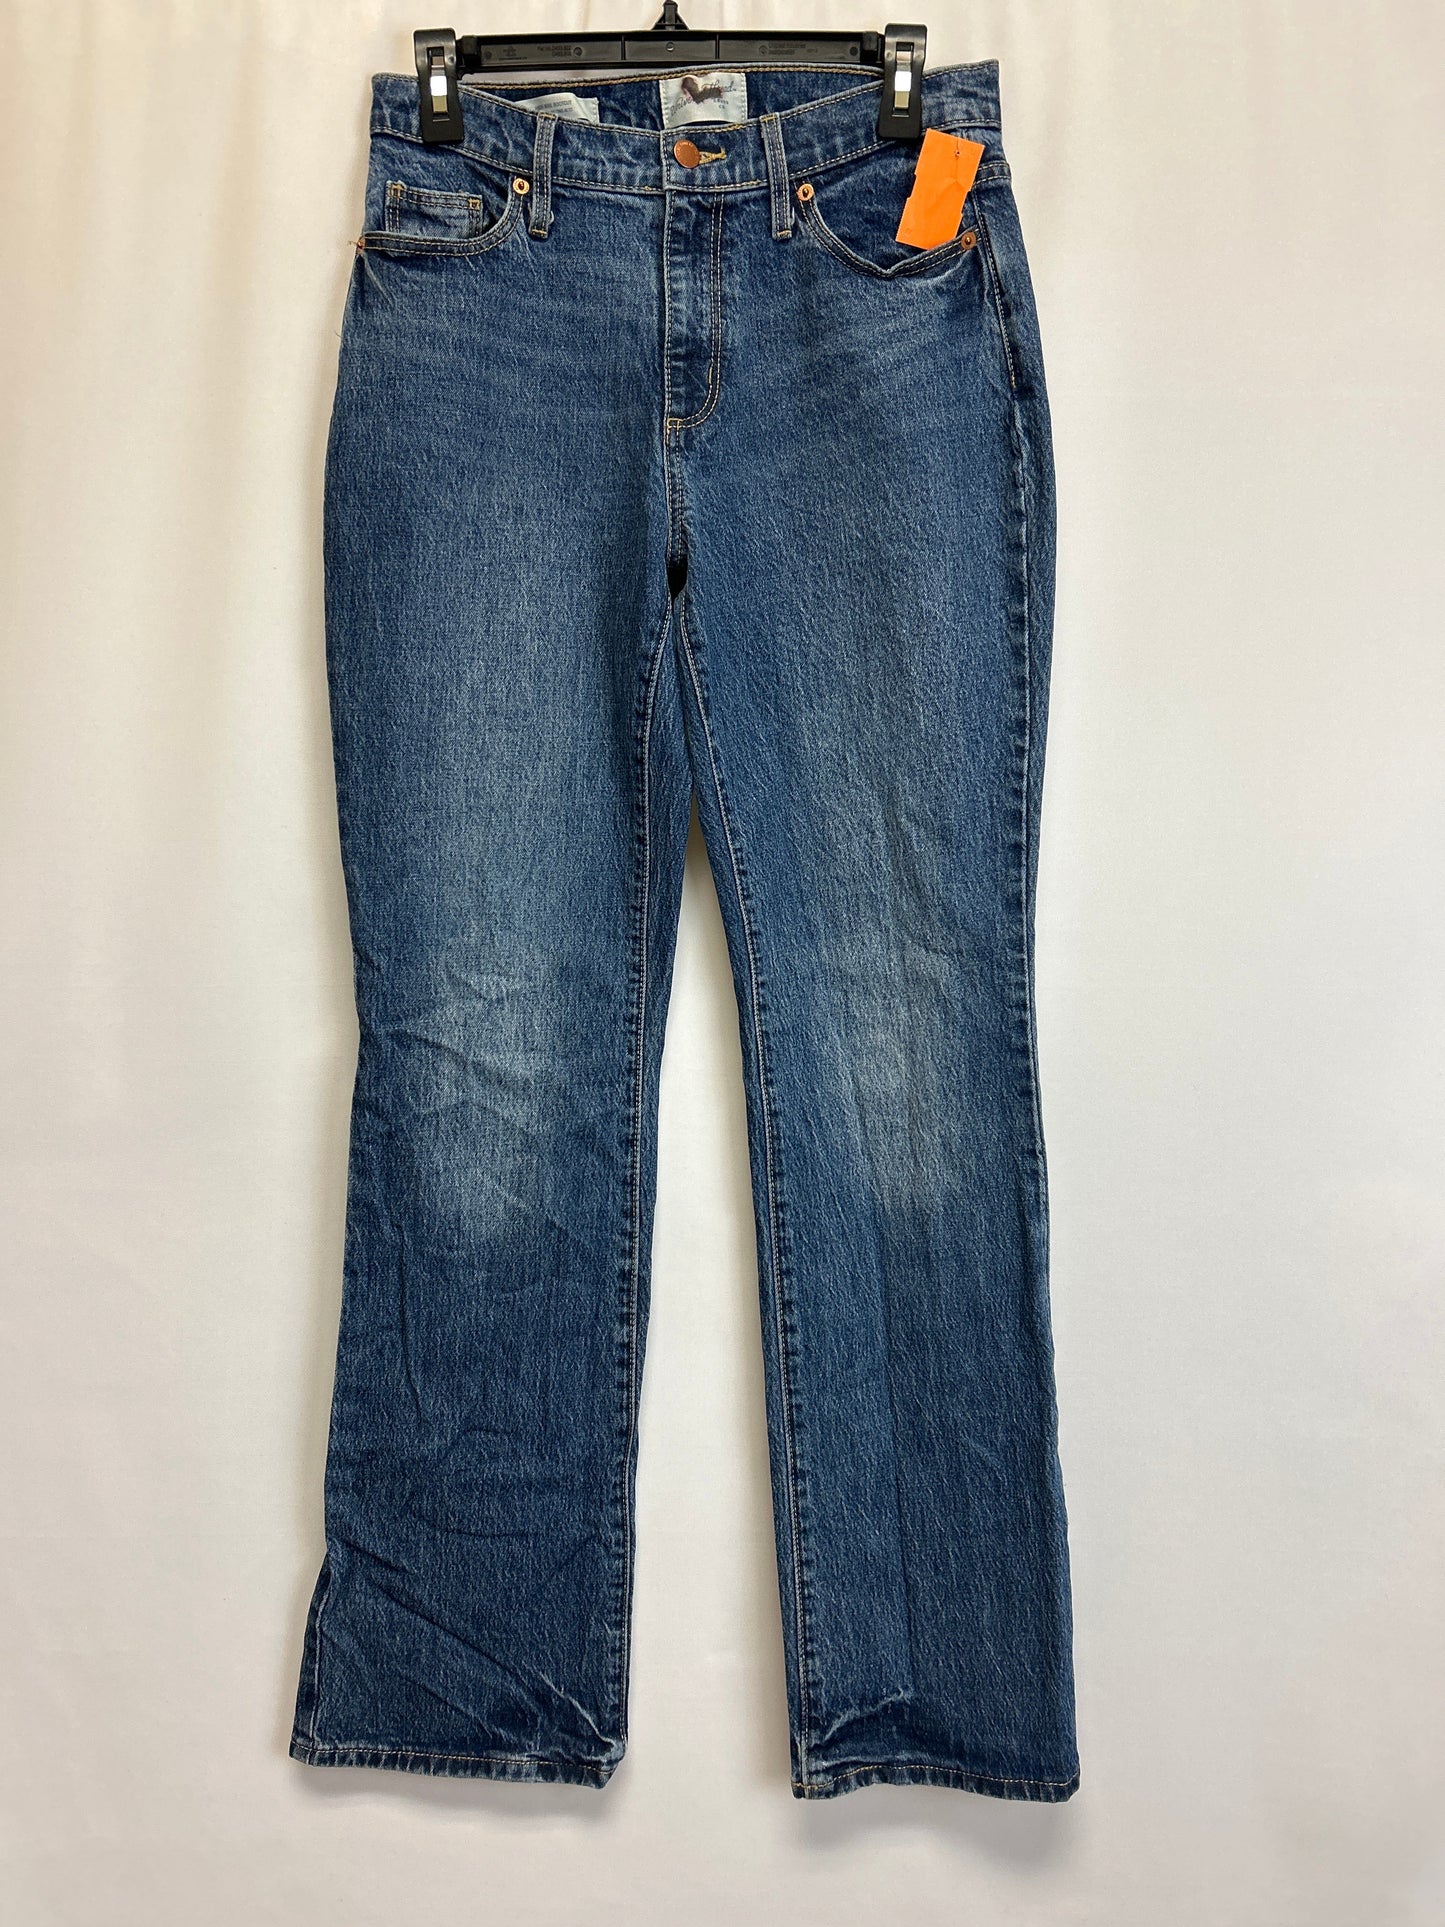 Jeans Boot Cut By Universal Thread  Size: 2